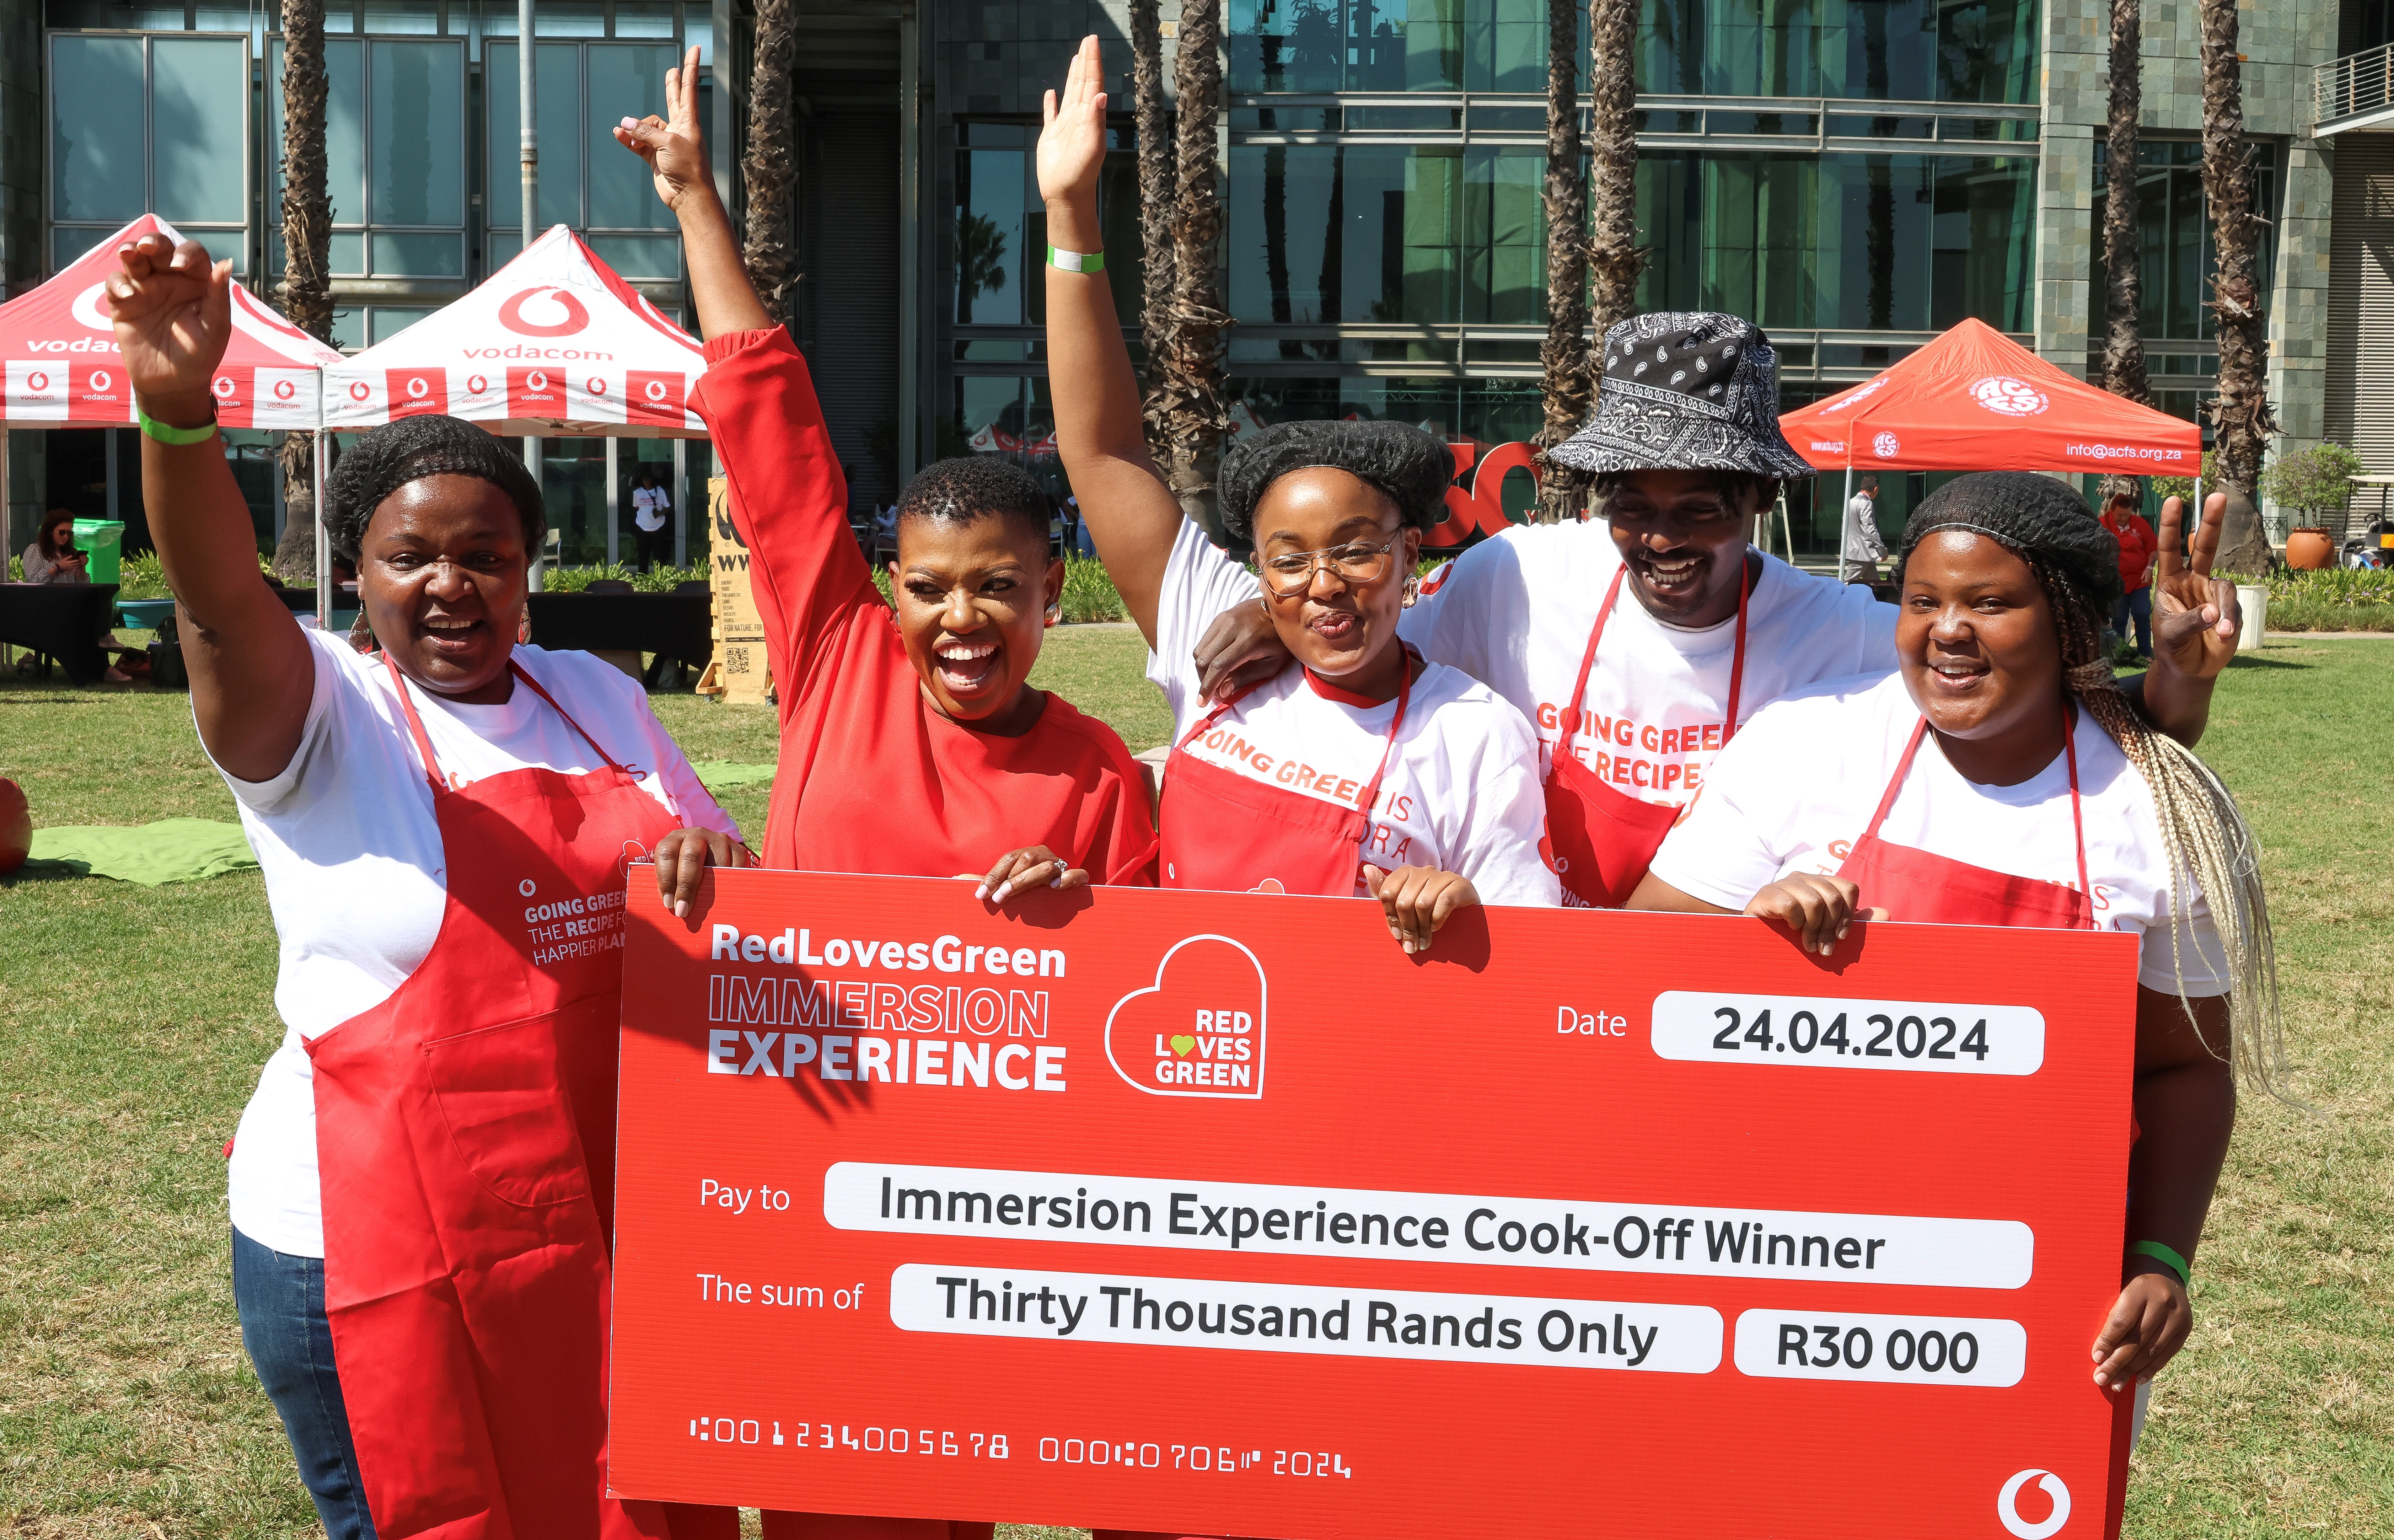 In Pictures: Chef Zanele Van Zyl headlines sustainability themed cook-off